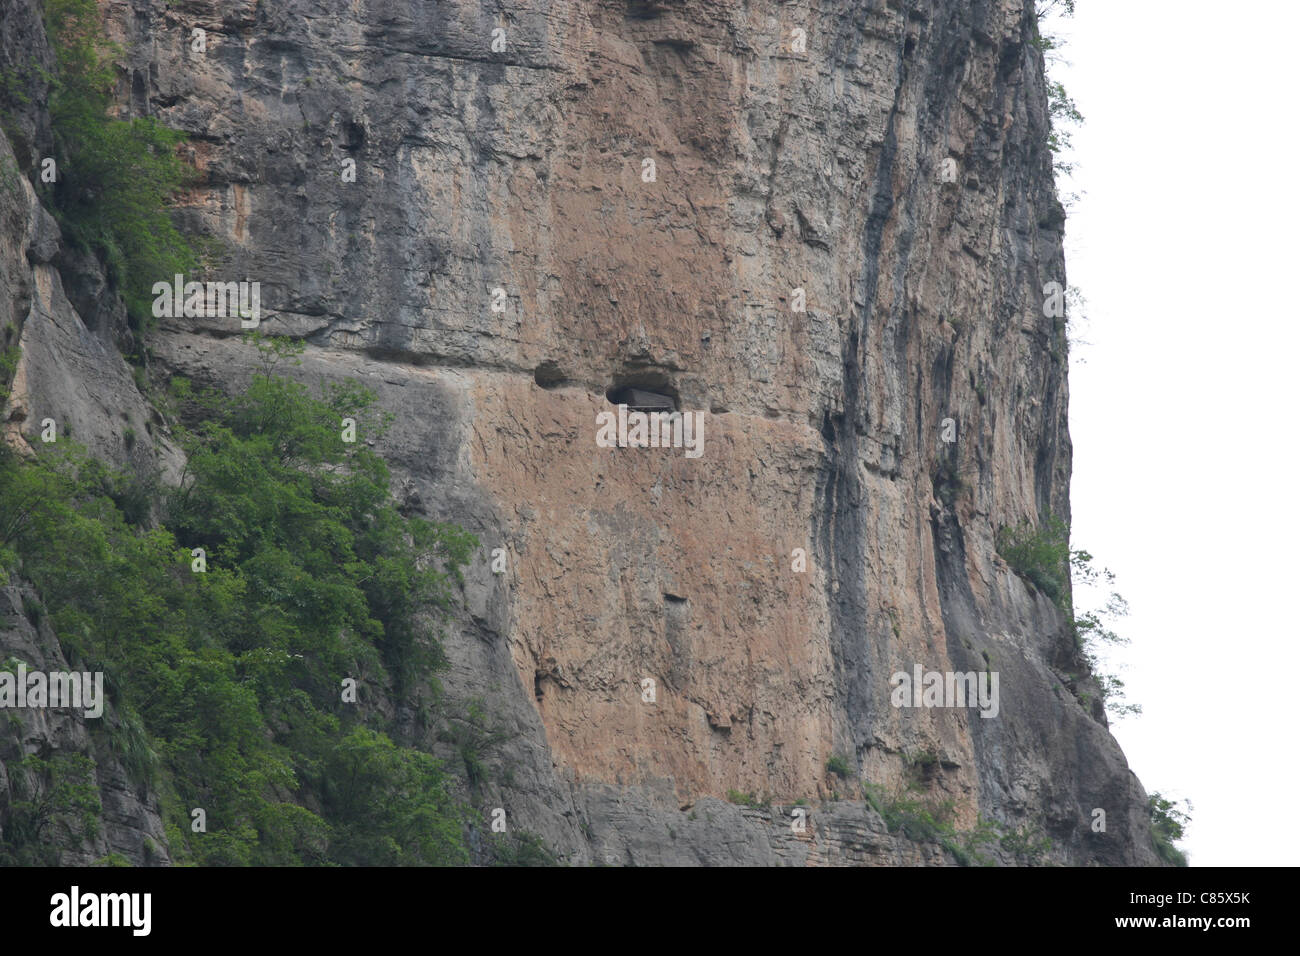 Hanging coffins in cliff caves, Lesser Three Gorges, China Stock Photo